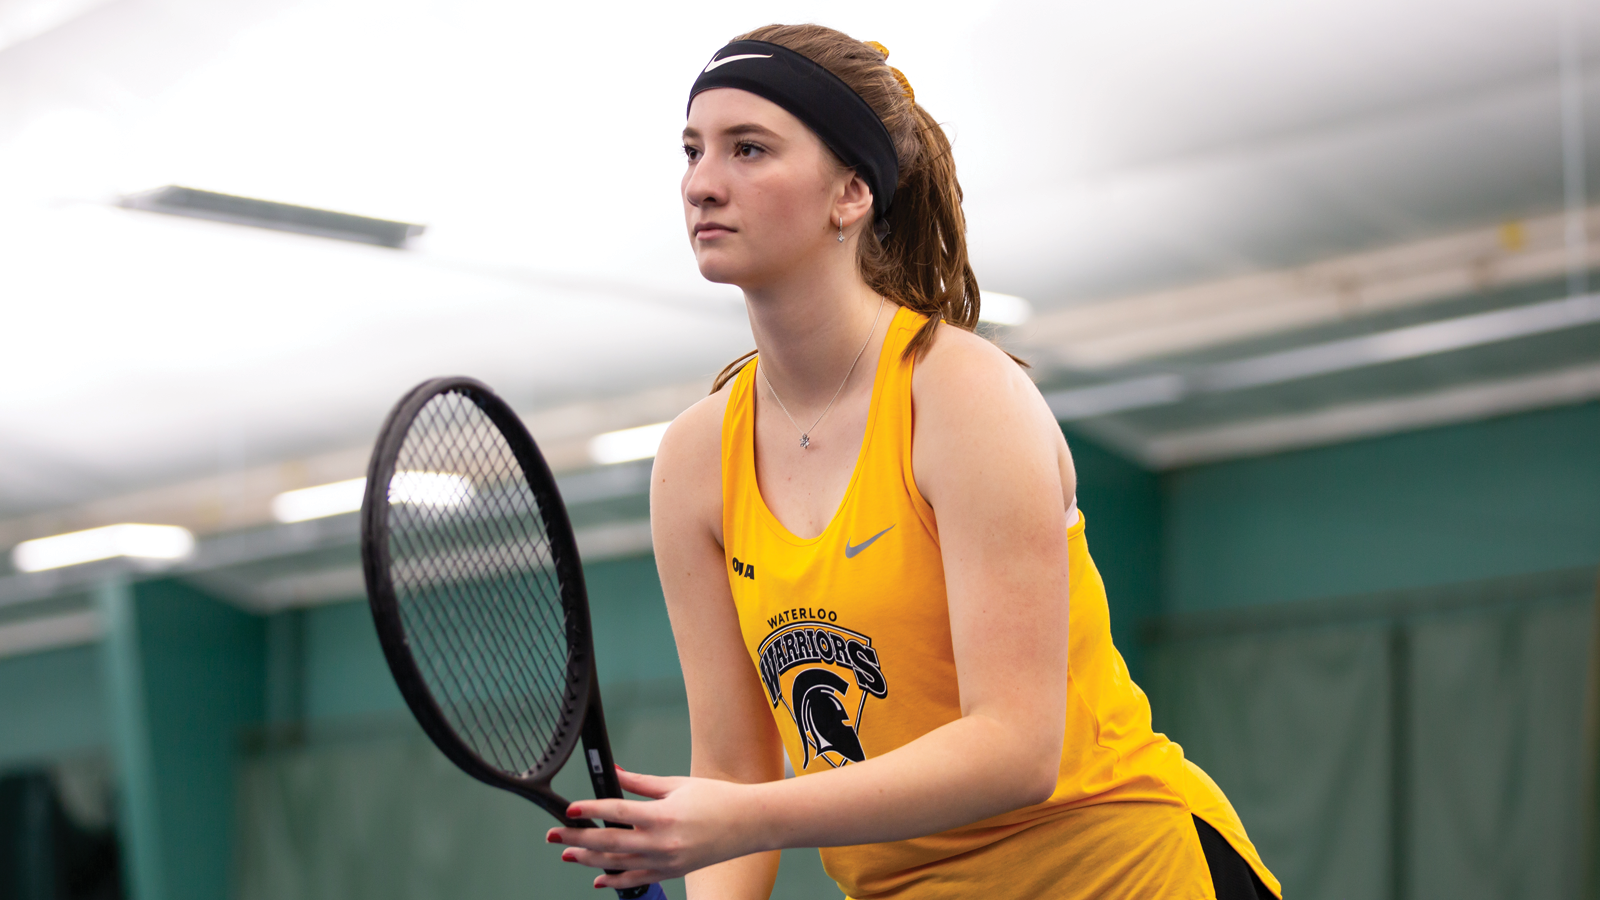 Action photo of Waterloo women's tennis player holding her racquet in the ready position prior to a point